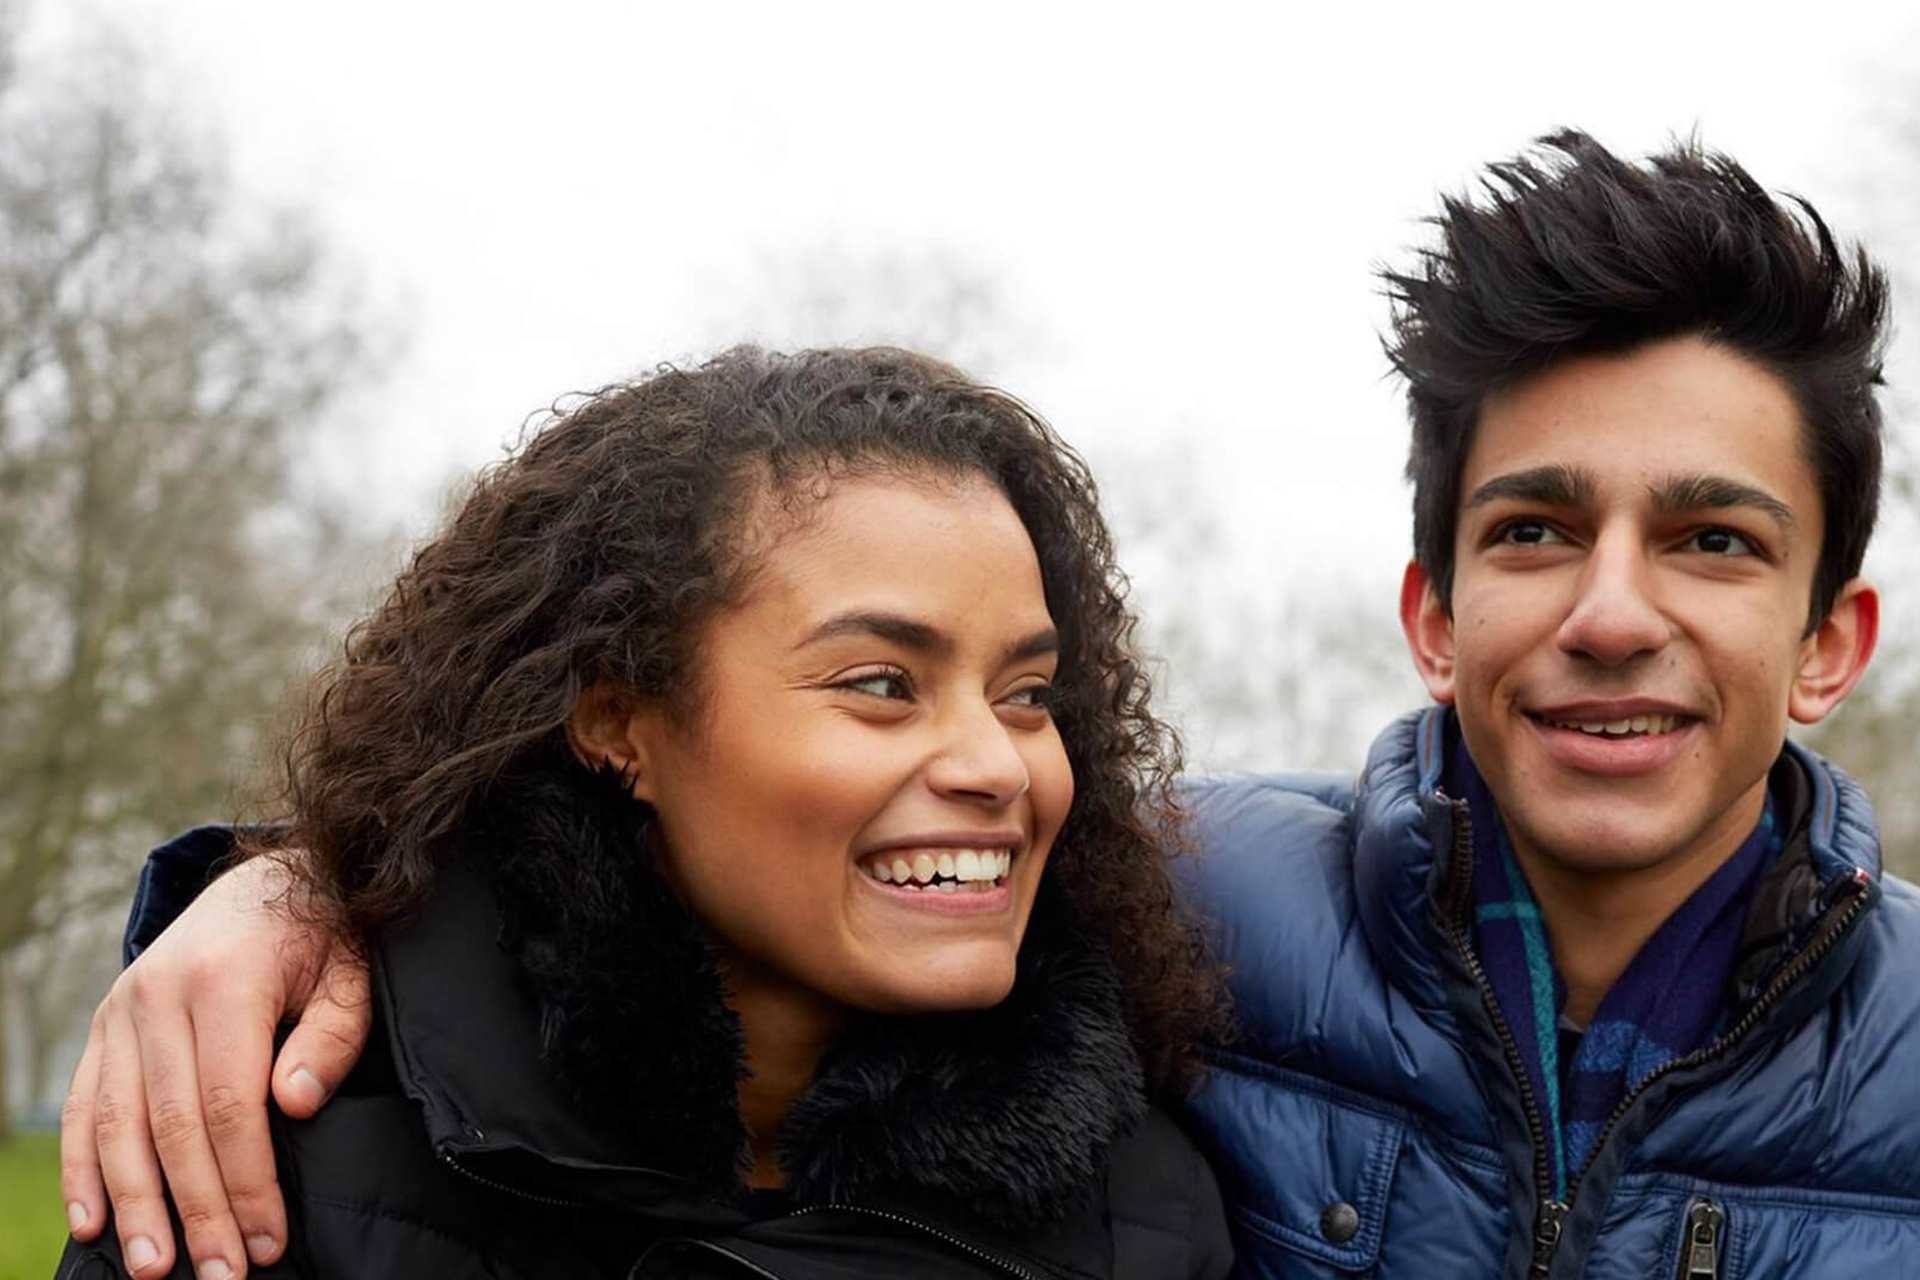 Two young people standing together and smiling, one has their arm around the shoulder of the other.